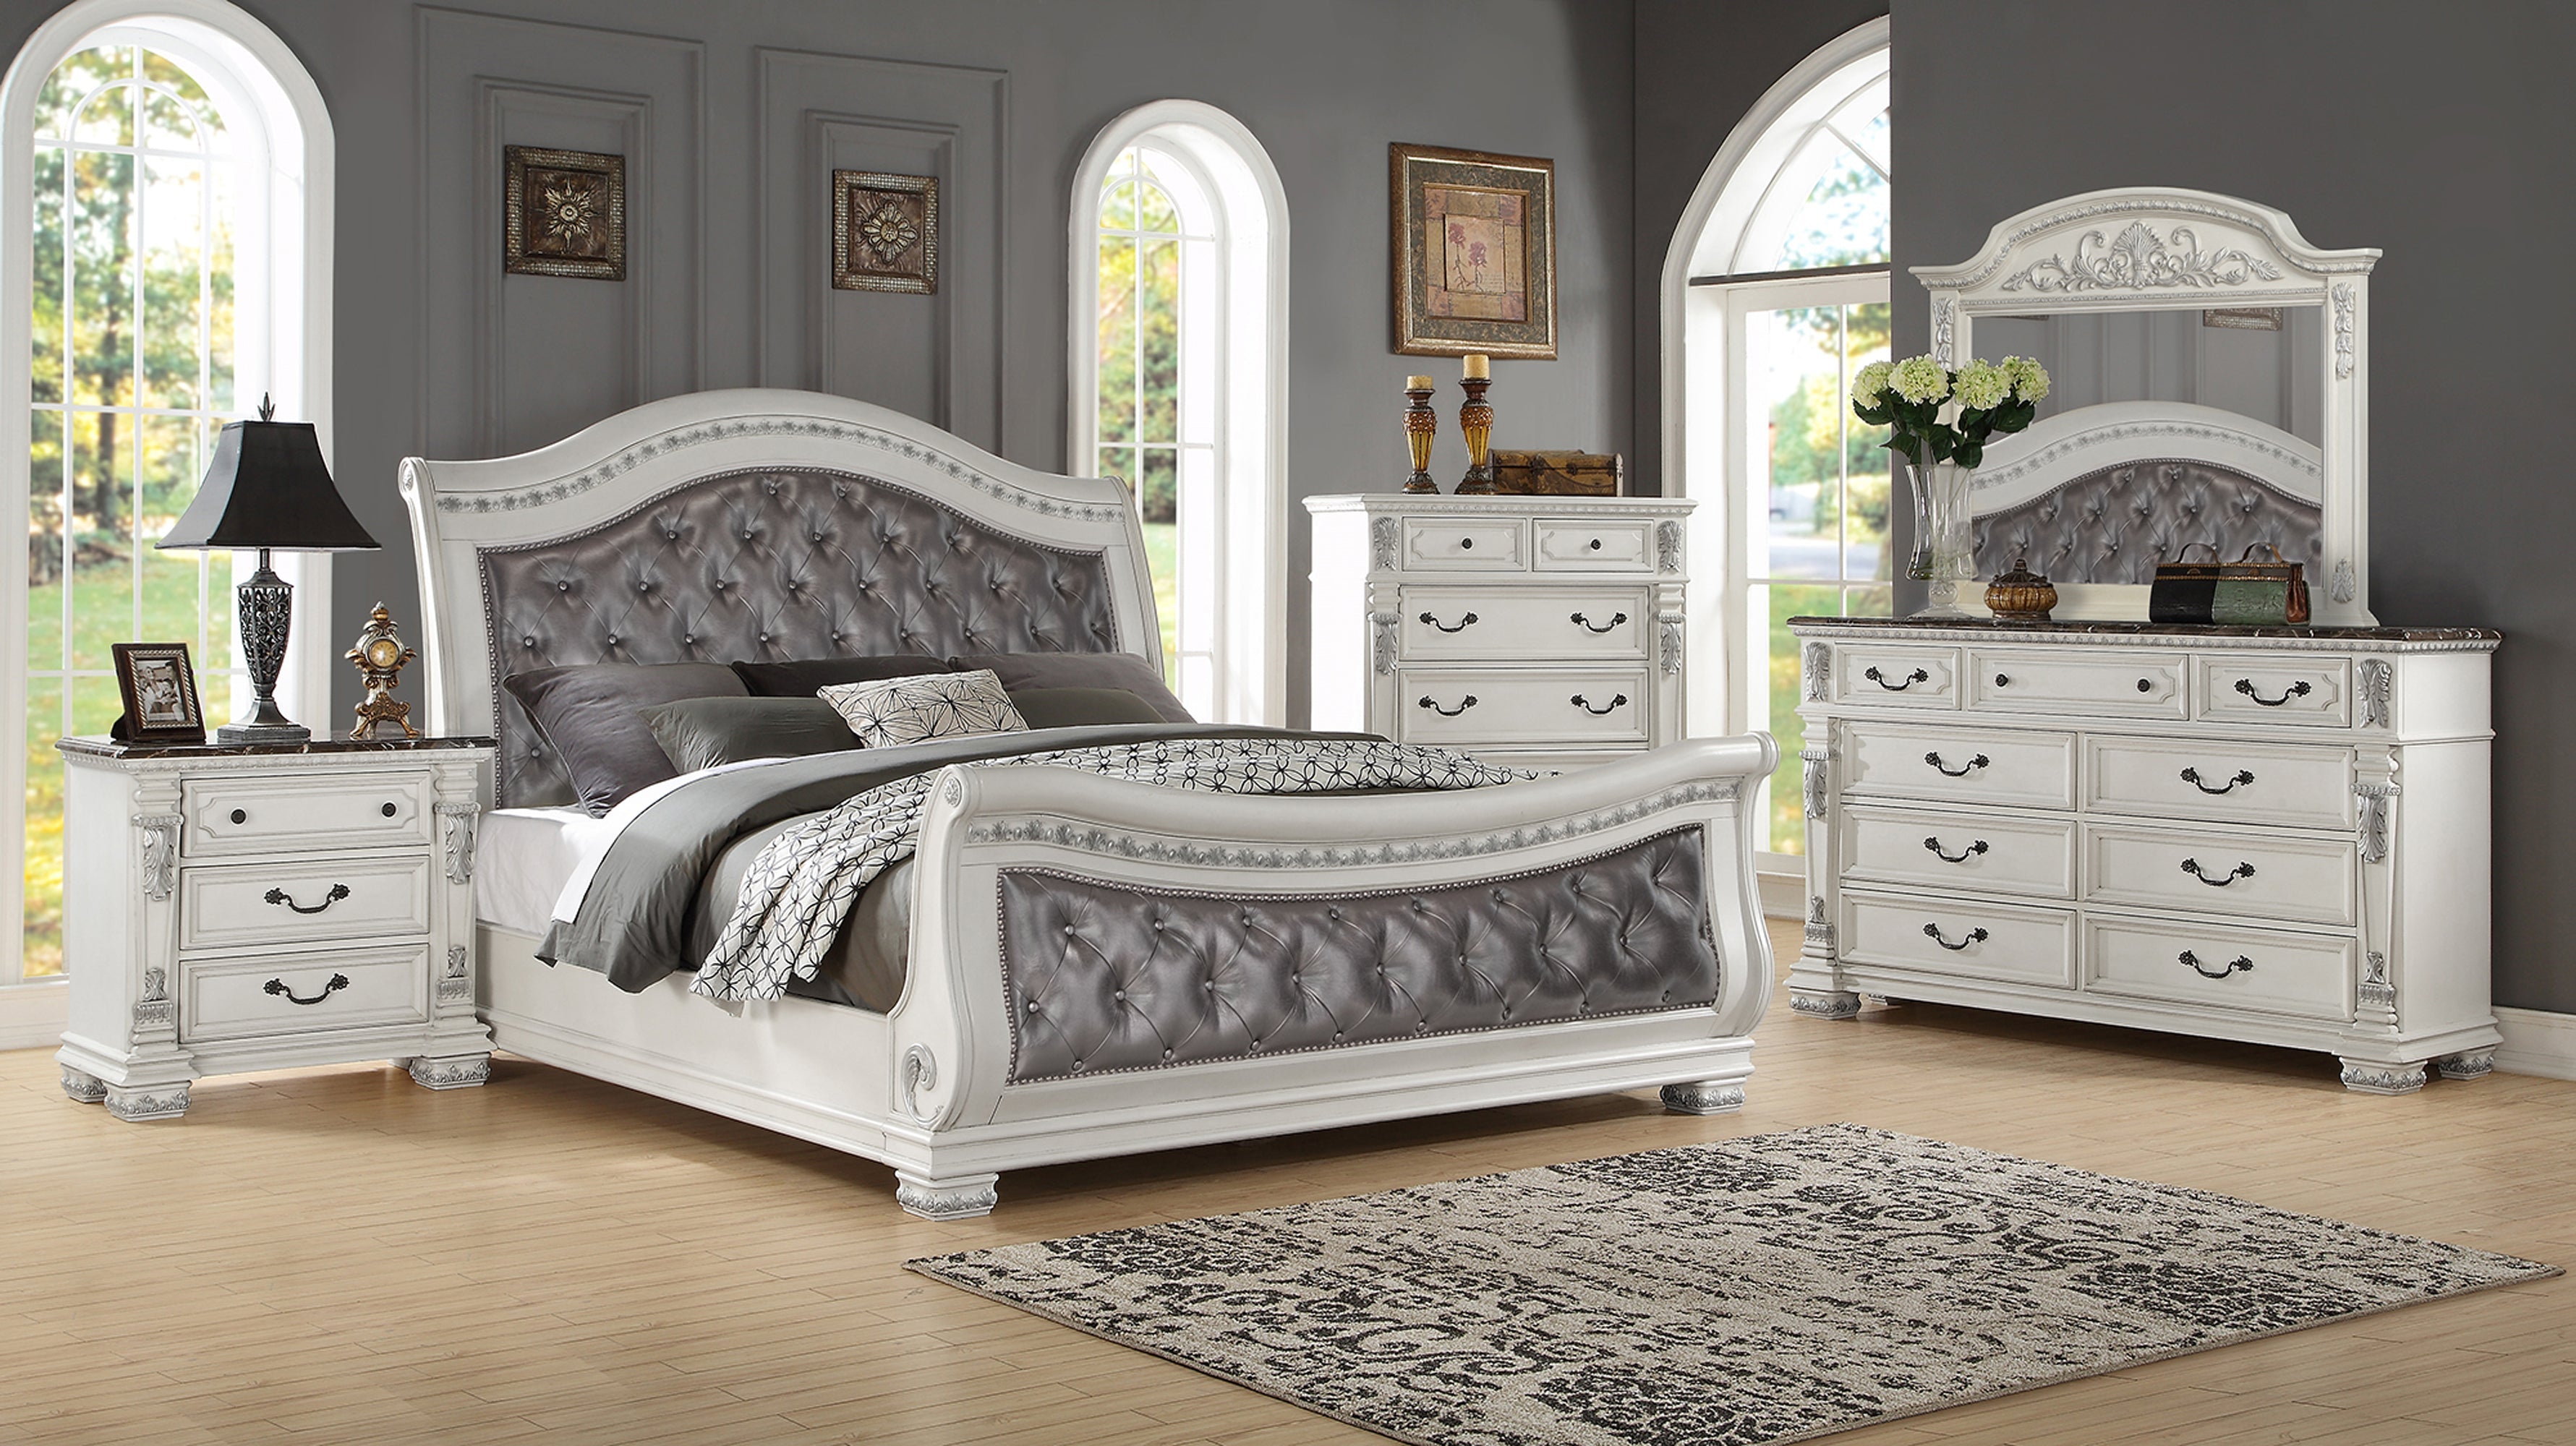 Oasis Home Bianca Queen SIze Bed